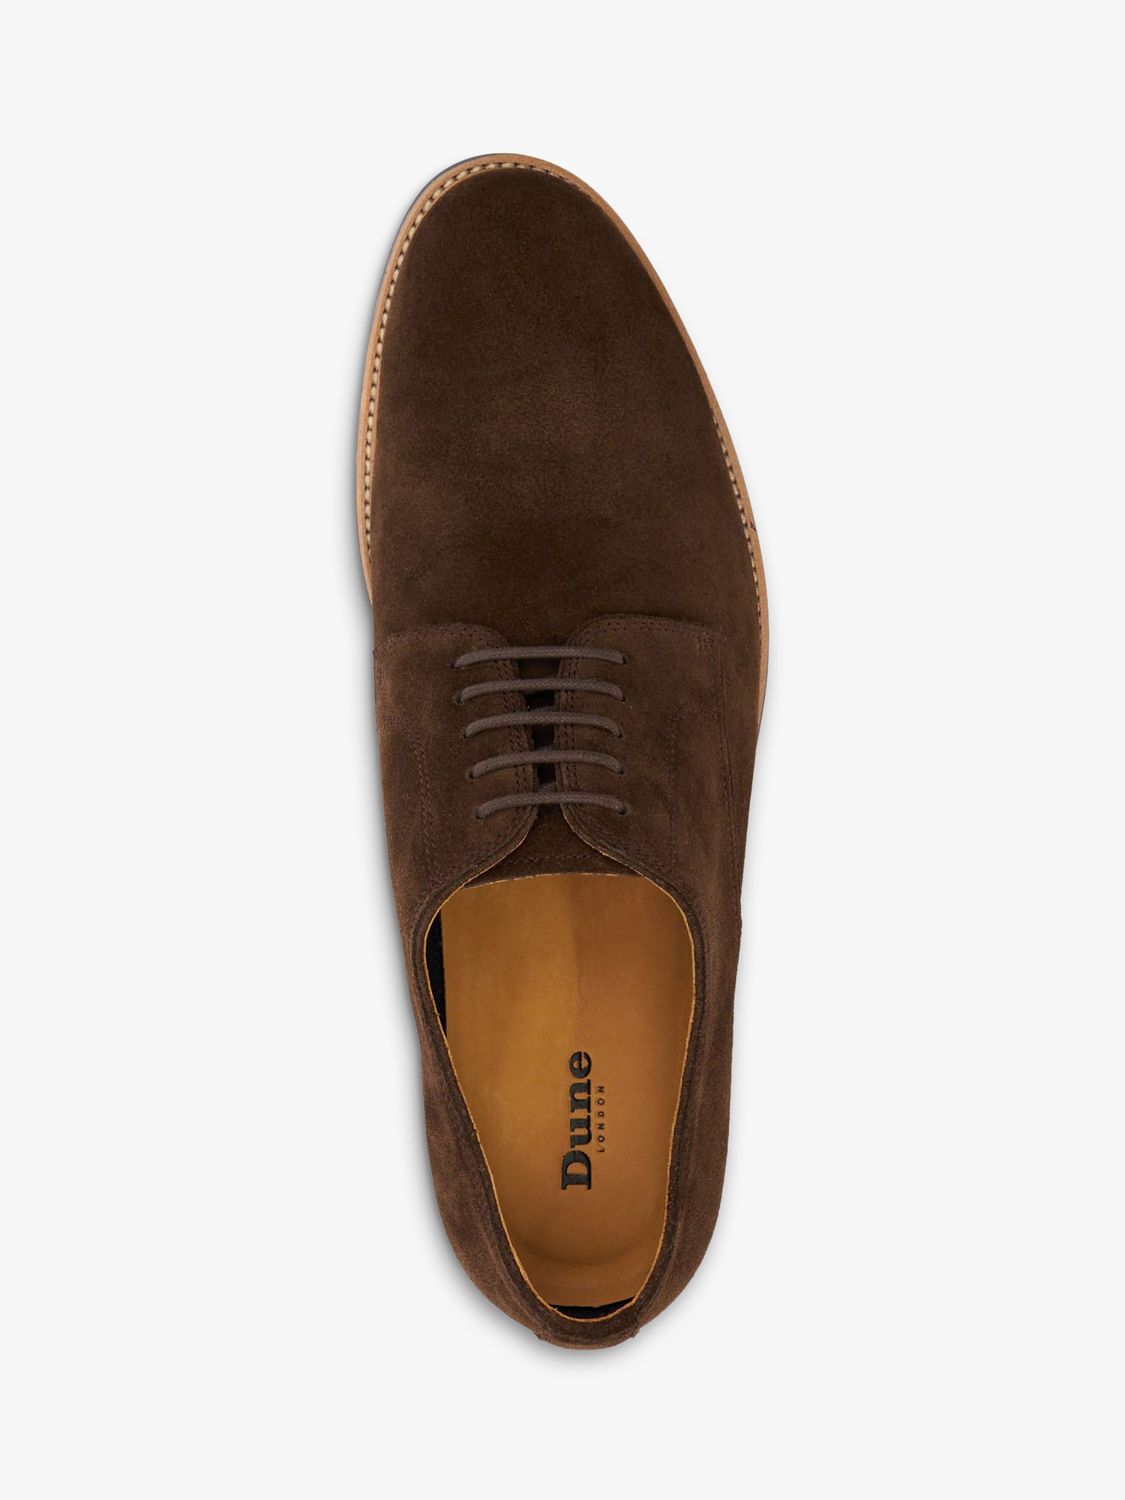 Buy Dune Stanleyyy Gibson Suede Shoes, Brown Online at johnlewis.com